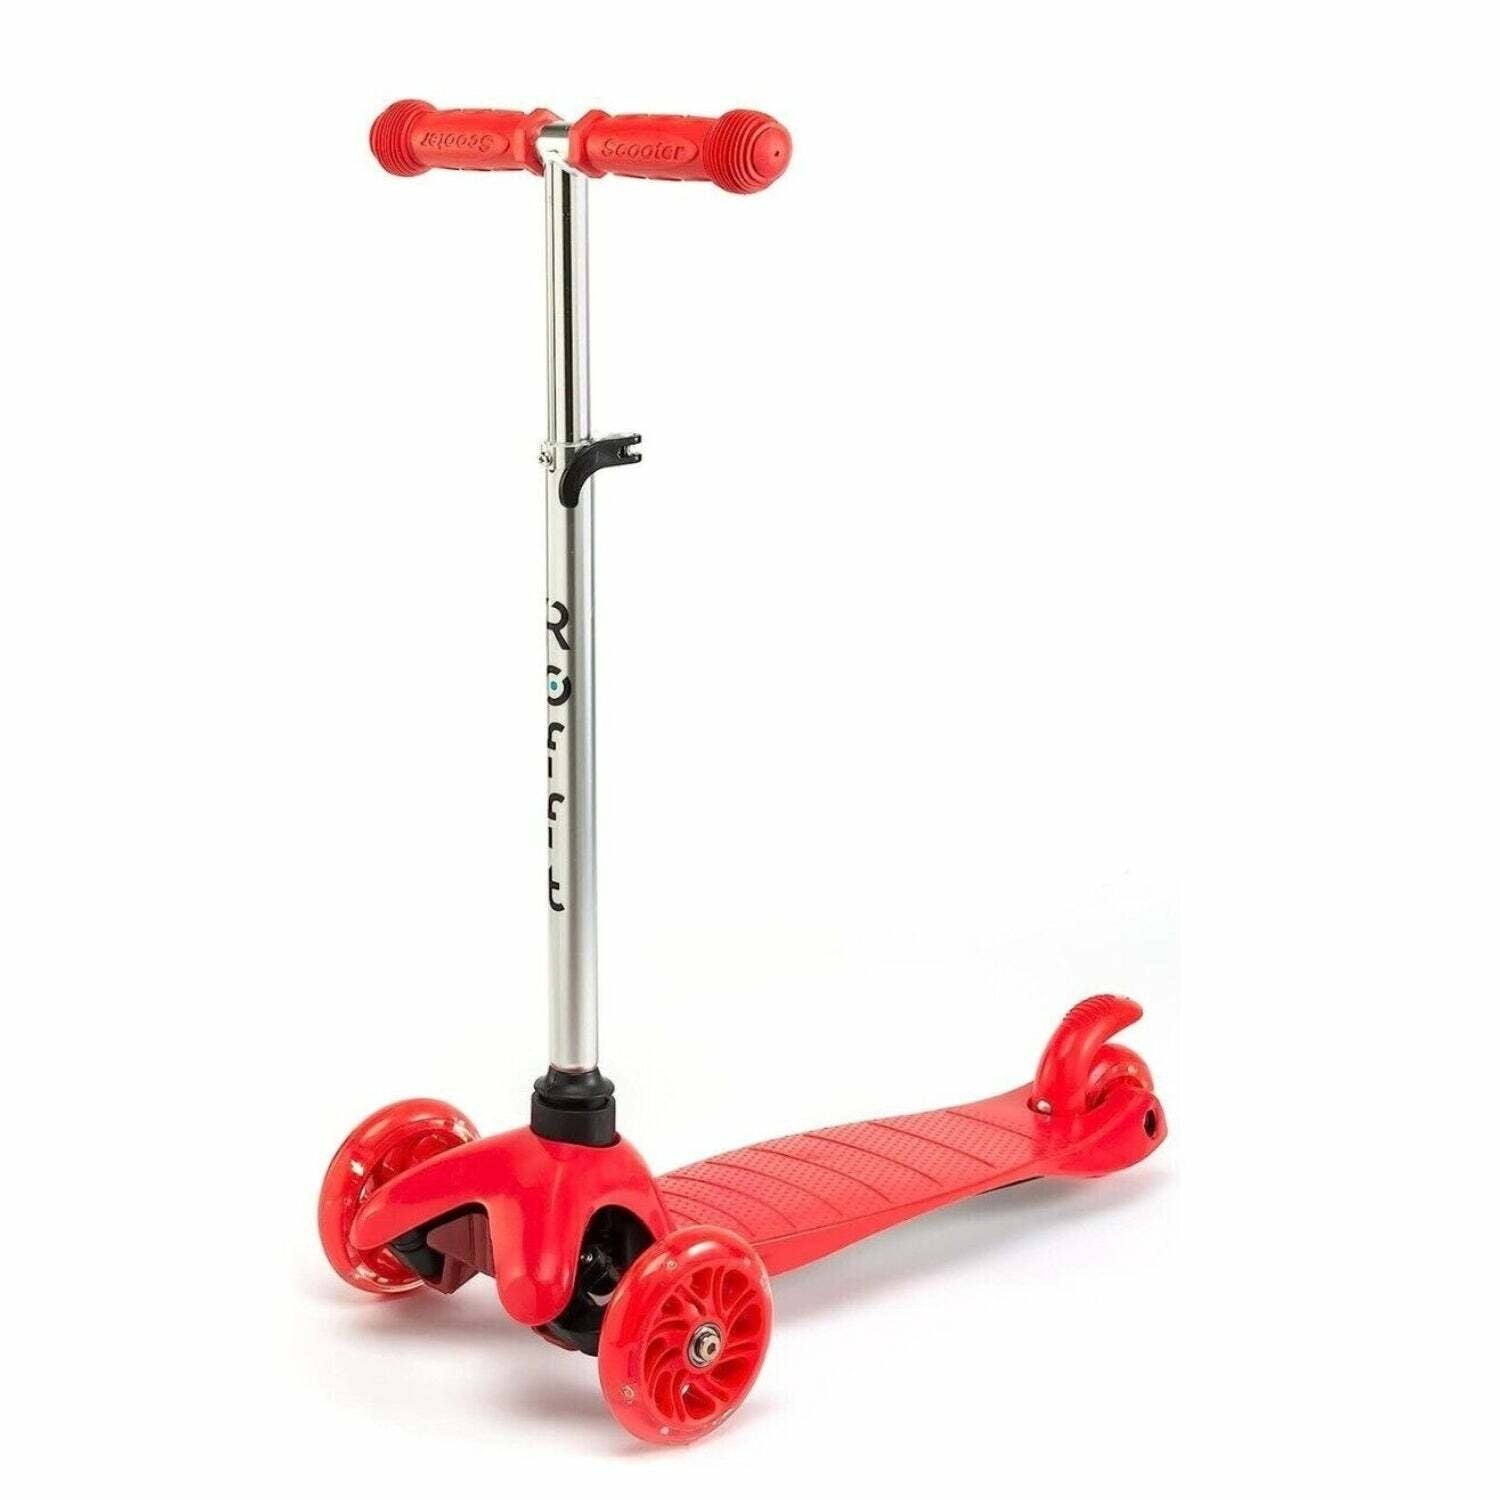 ROFFT - Kick Scooter, Lean-to-Steer LED 3 Wheel, Kids Ages 3-5 Red